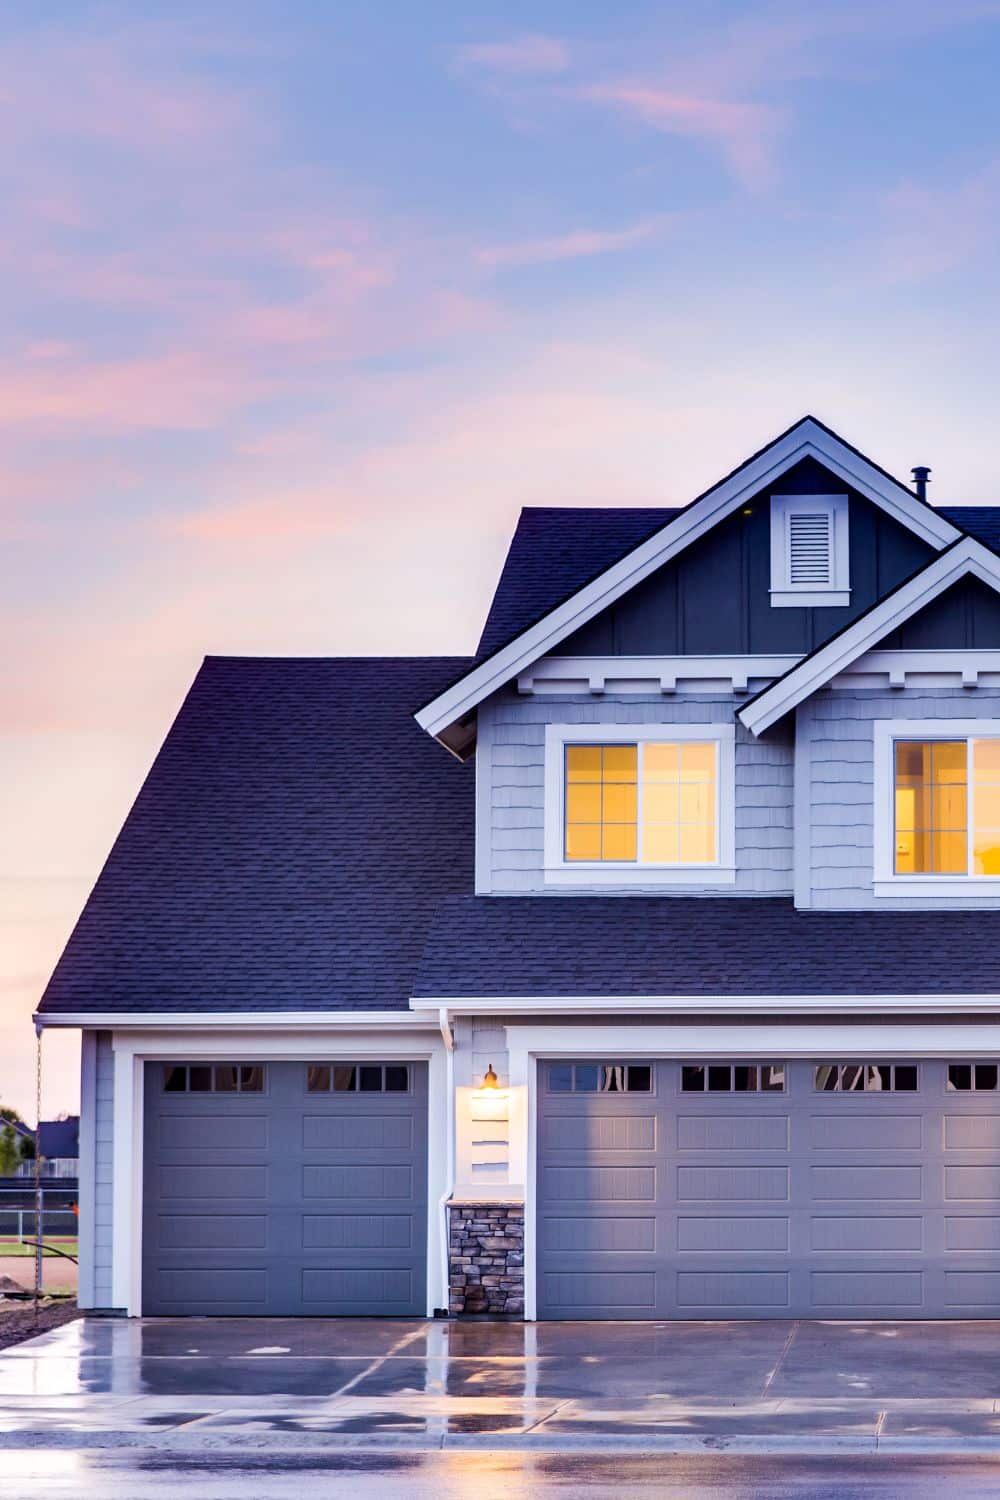 6 Steps To Follow To Make Sure Your House Is Built Well